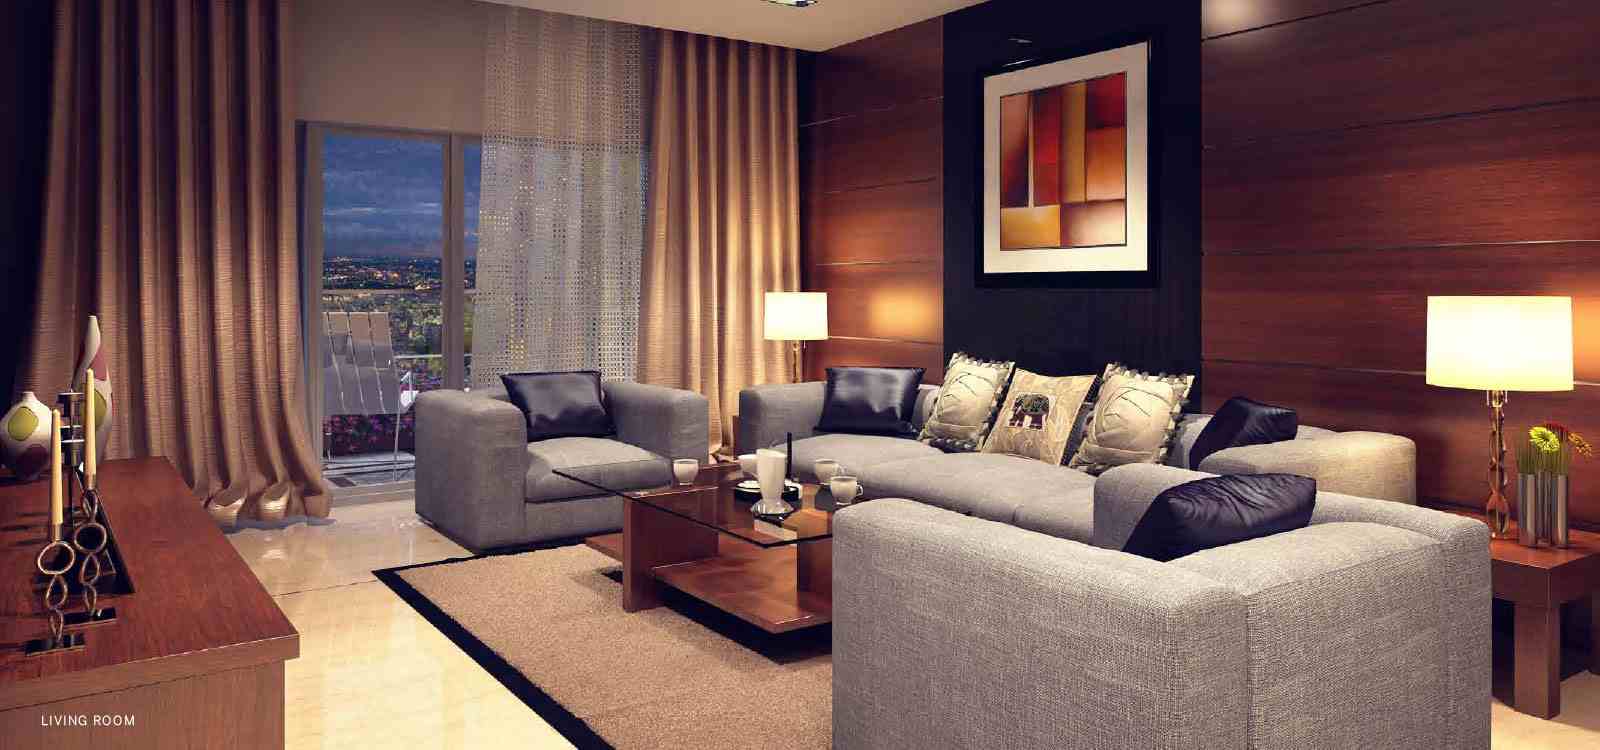 DLF Sector 63 Gurgaon - New Launch Residential Apartments